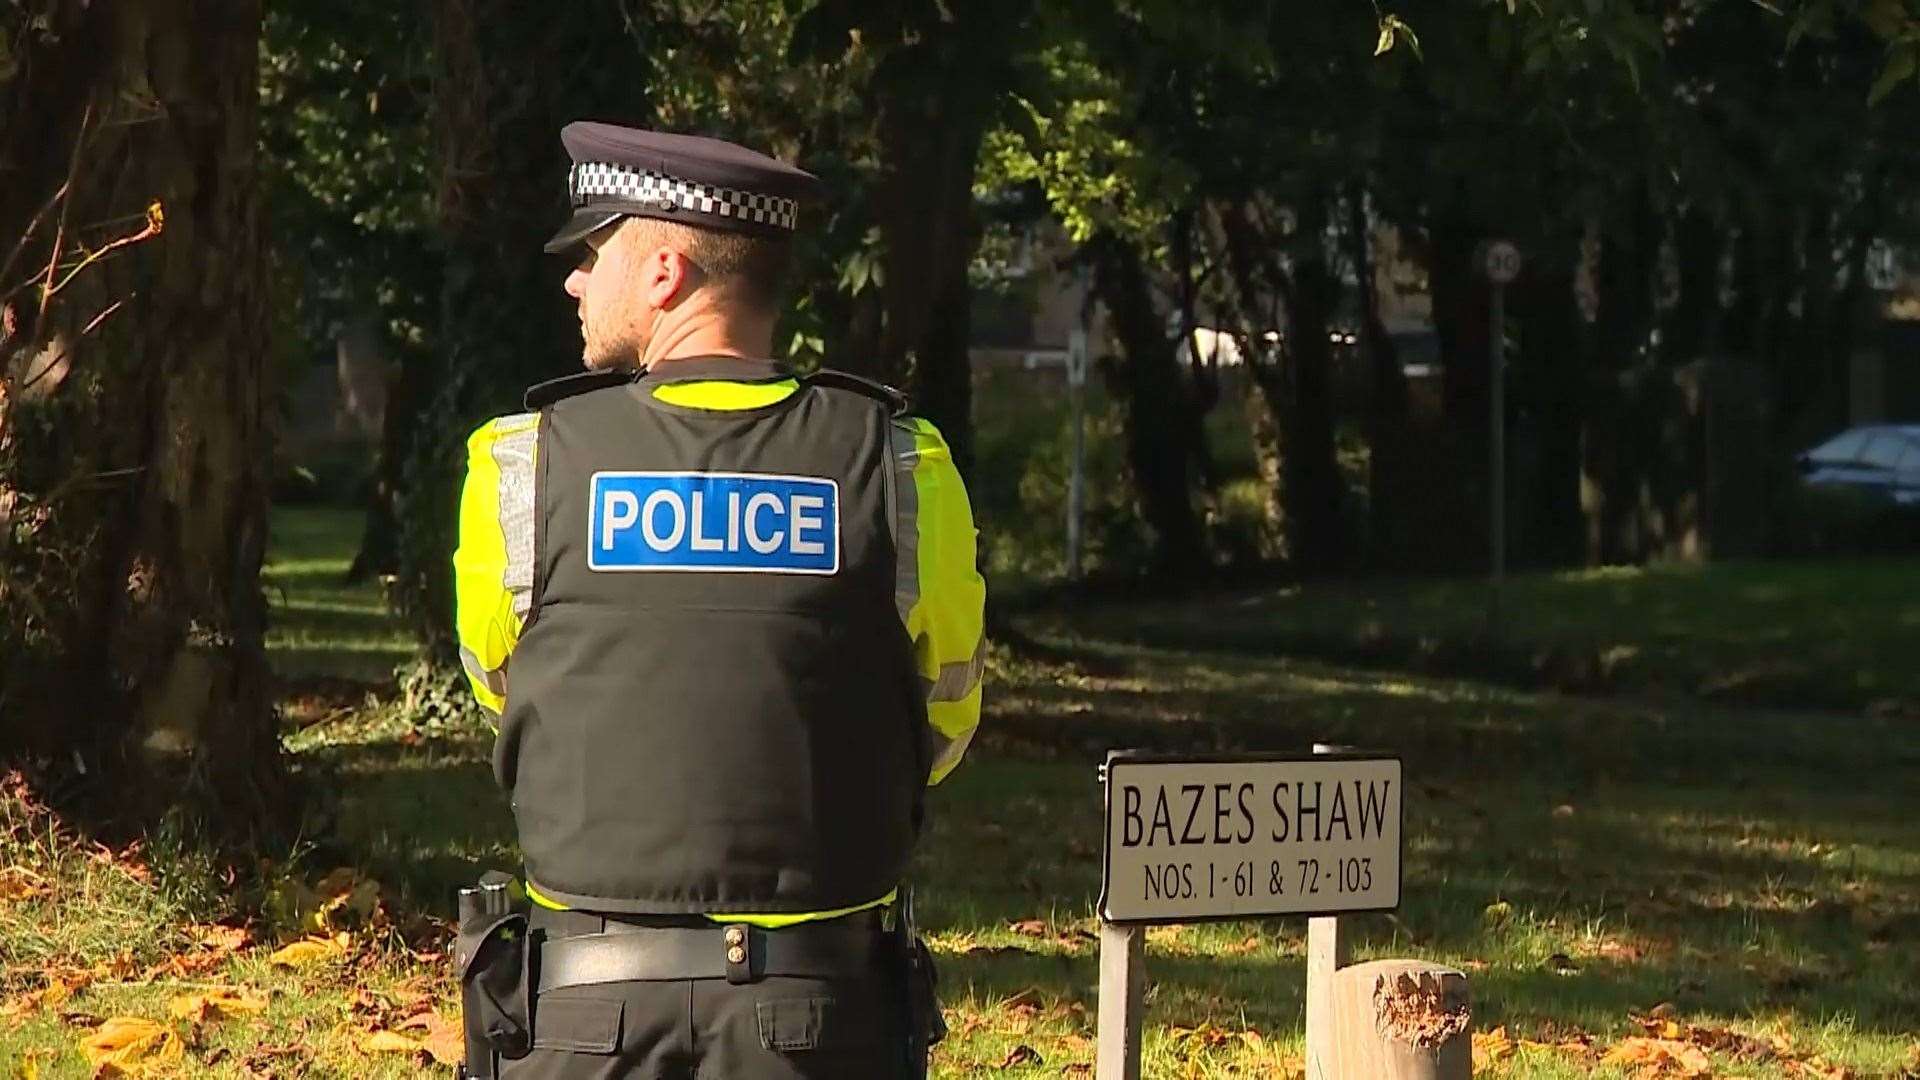 Police in Bazes Shaw in New Ash Green, before the arrival of the jury in the Sarah Wellgreen murder trial (18304978)